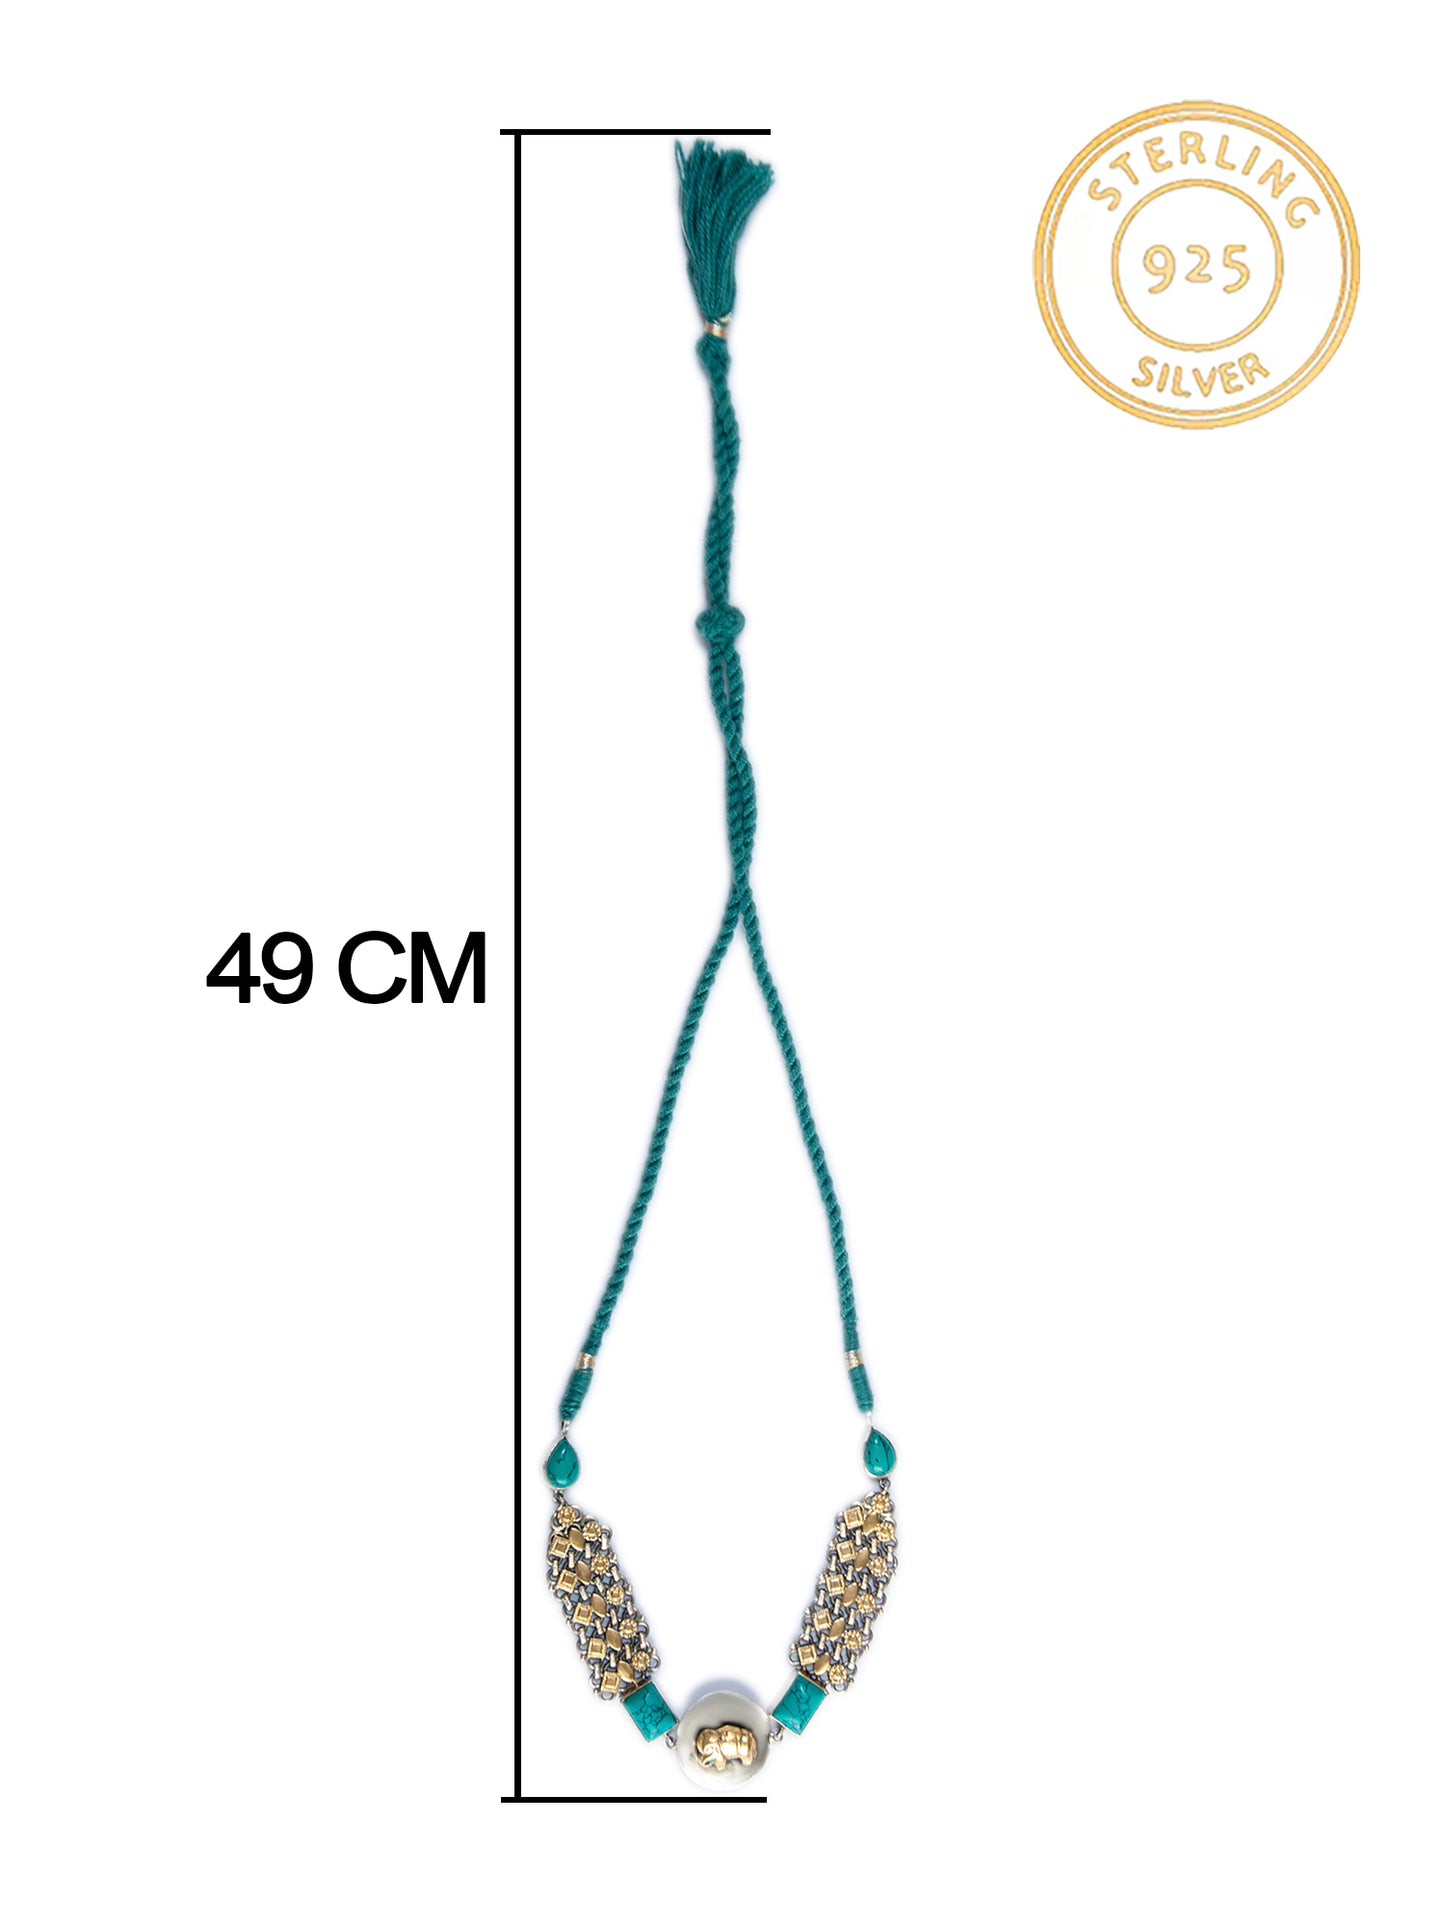 925 Sterling Silver Two Tone 22K Gold Plated Elephant Design Necklace With Turquoise Gemstone